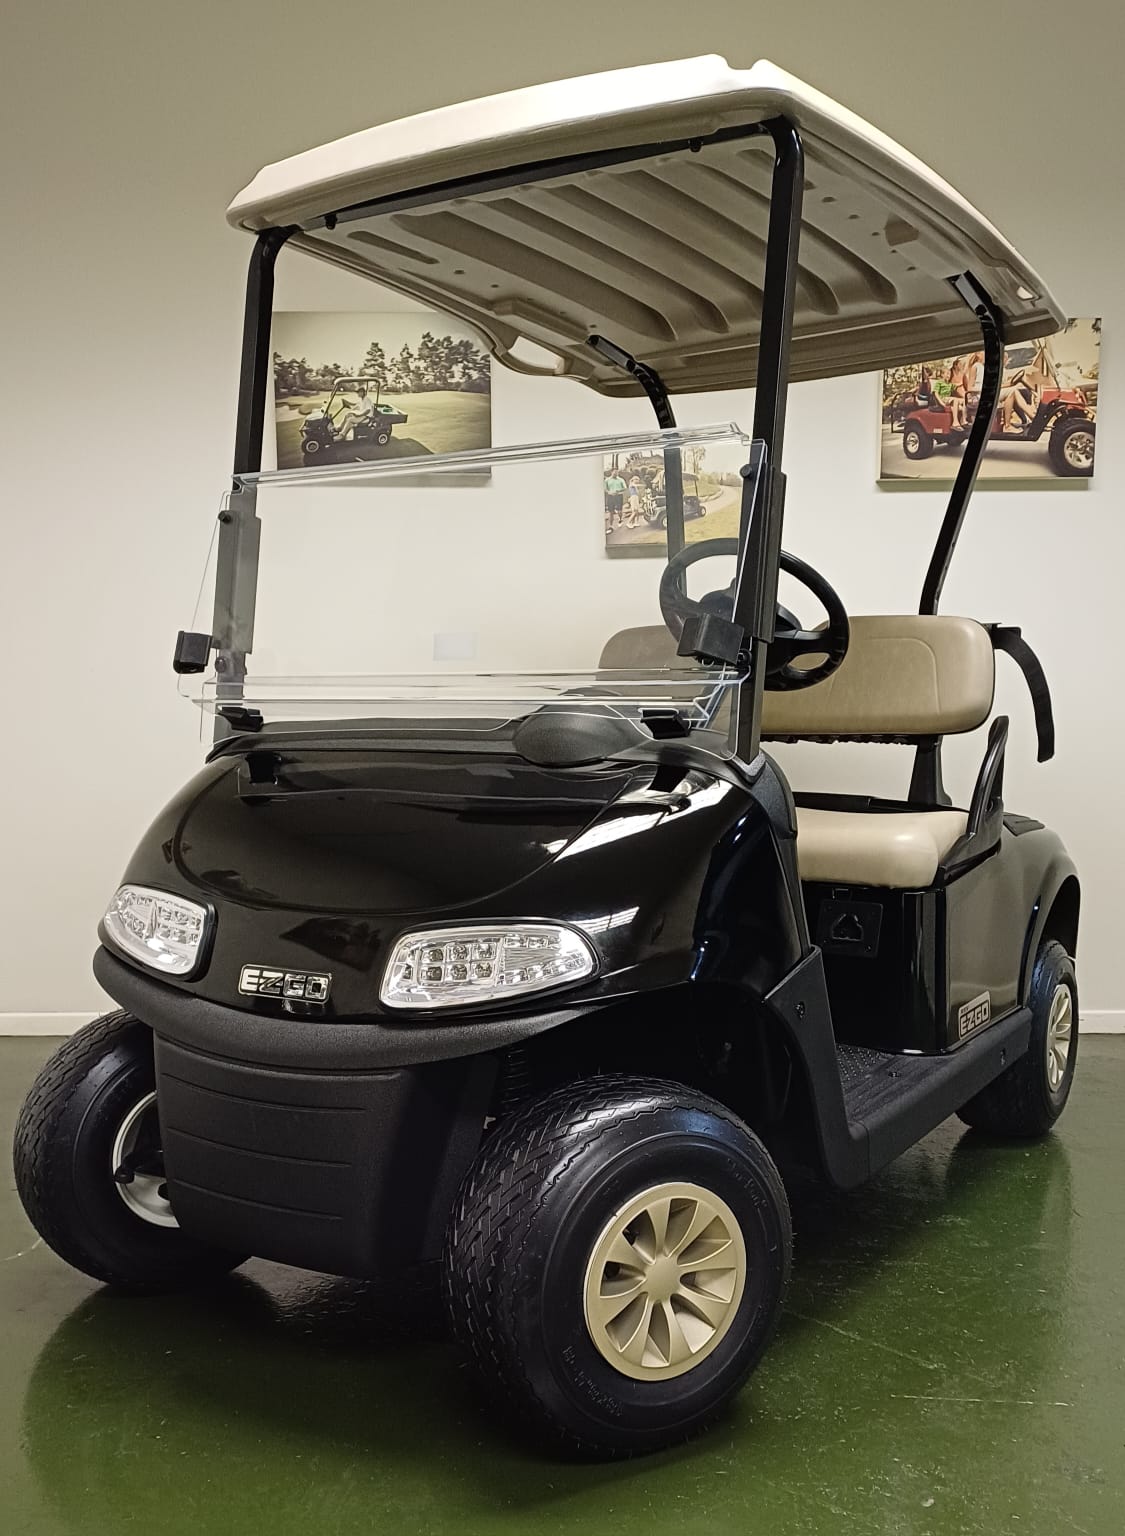 refurbished-rxv-freedom-2-seater-lithium